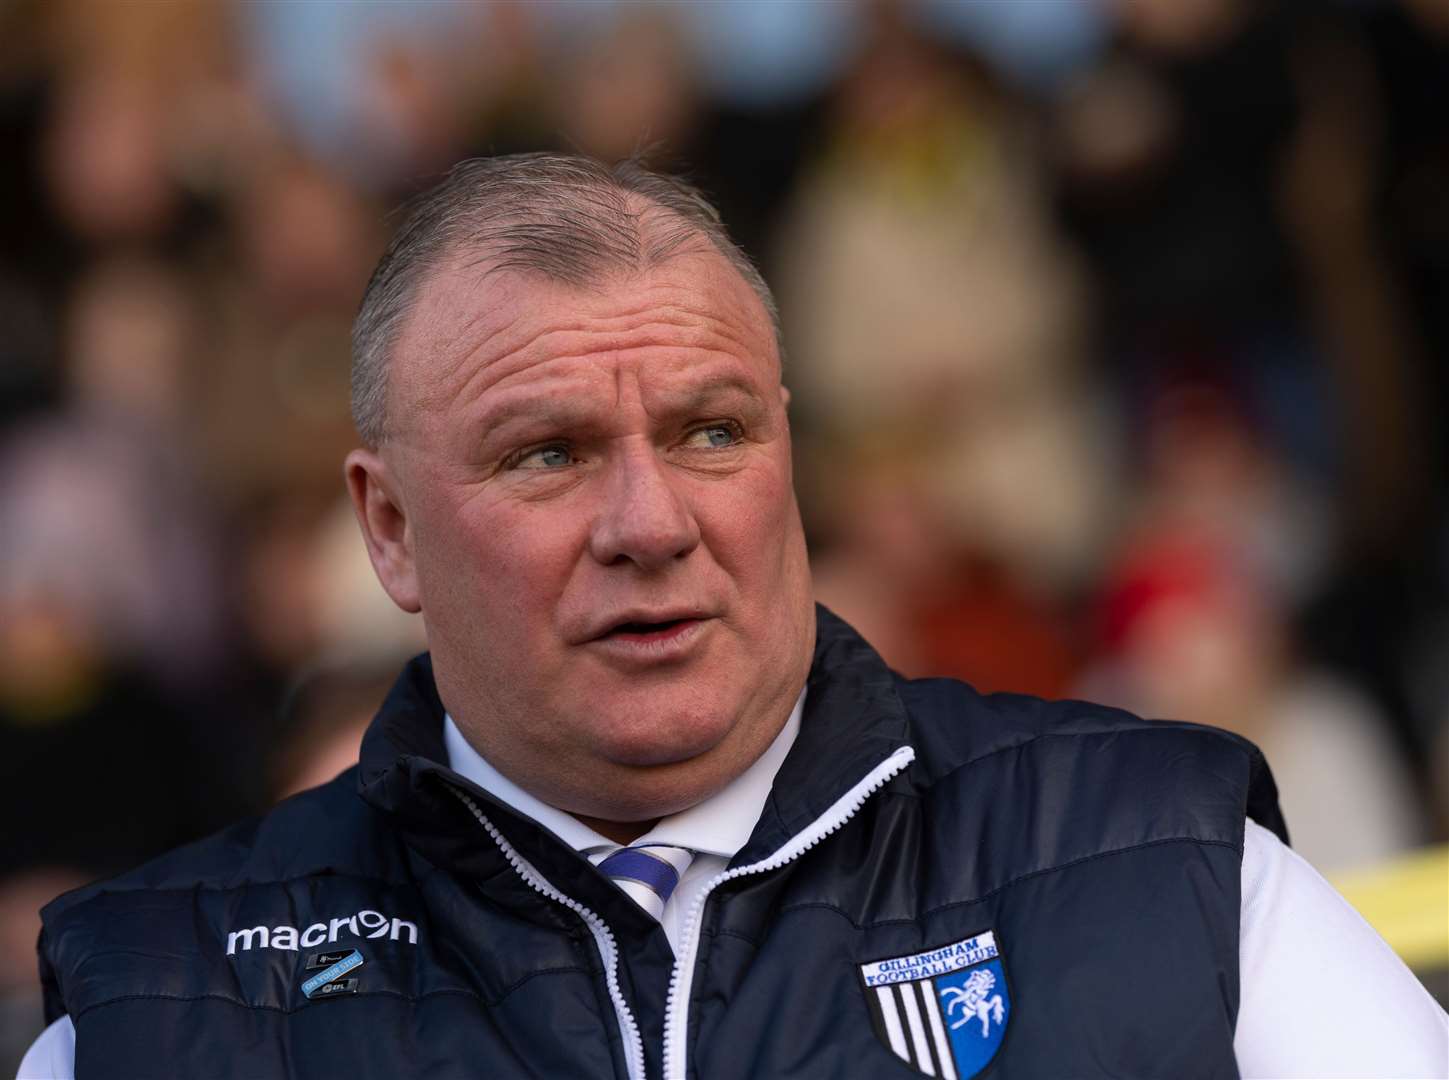 Gillingham manager Steve Evans made plenty of changes at Ipswich and his side lost 2-0